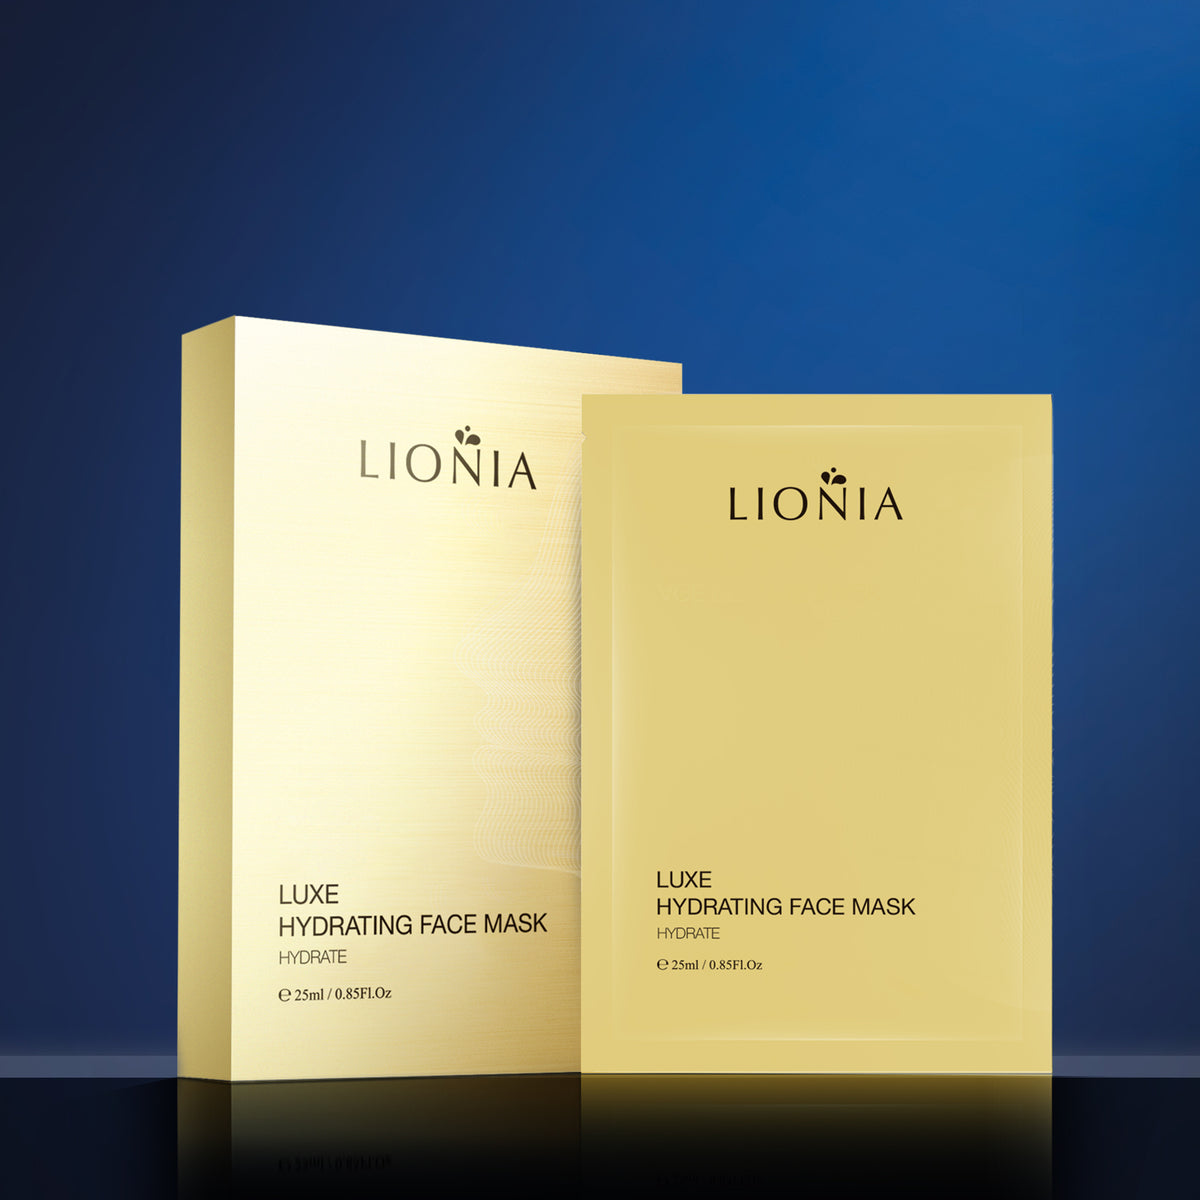 Lionia Luxe Hydrating Face Mask 25mL x 5 Pack